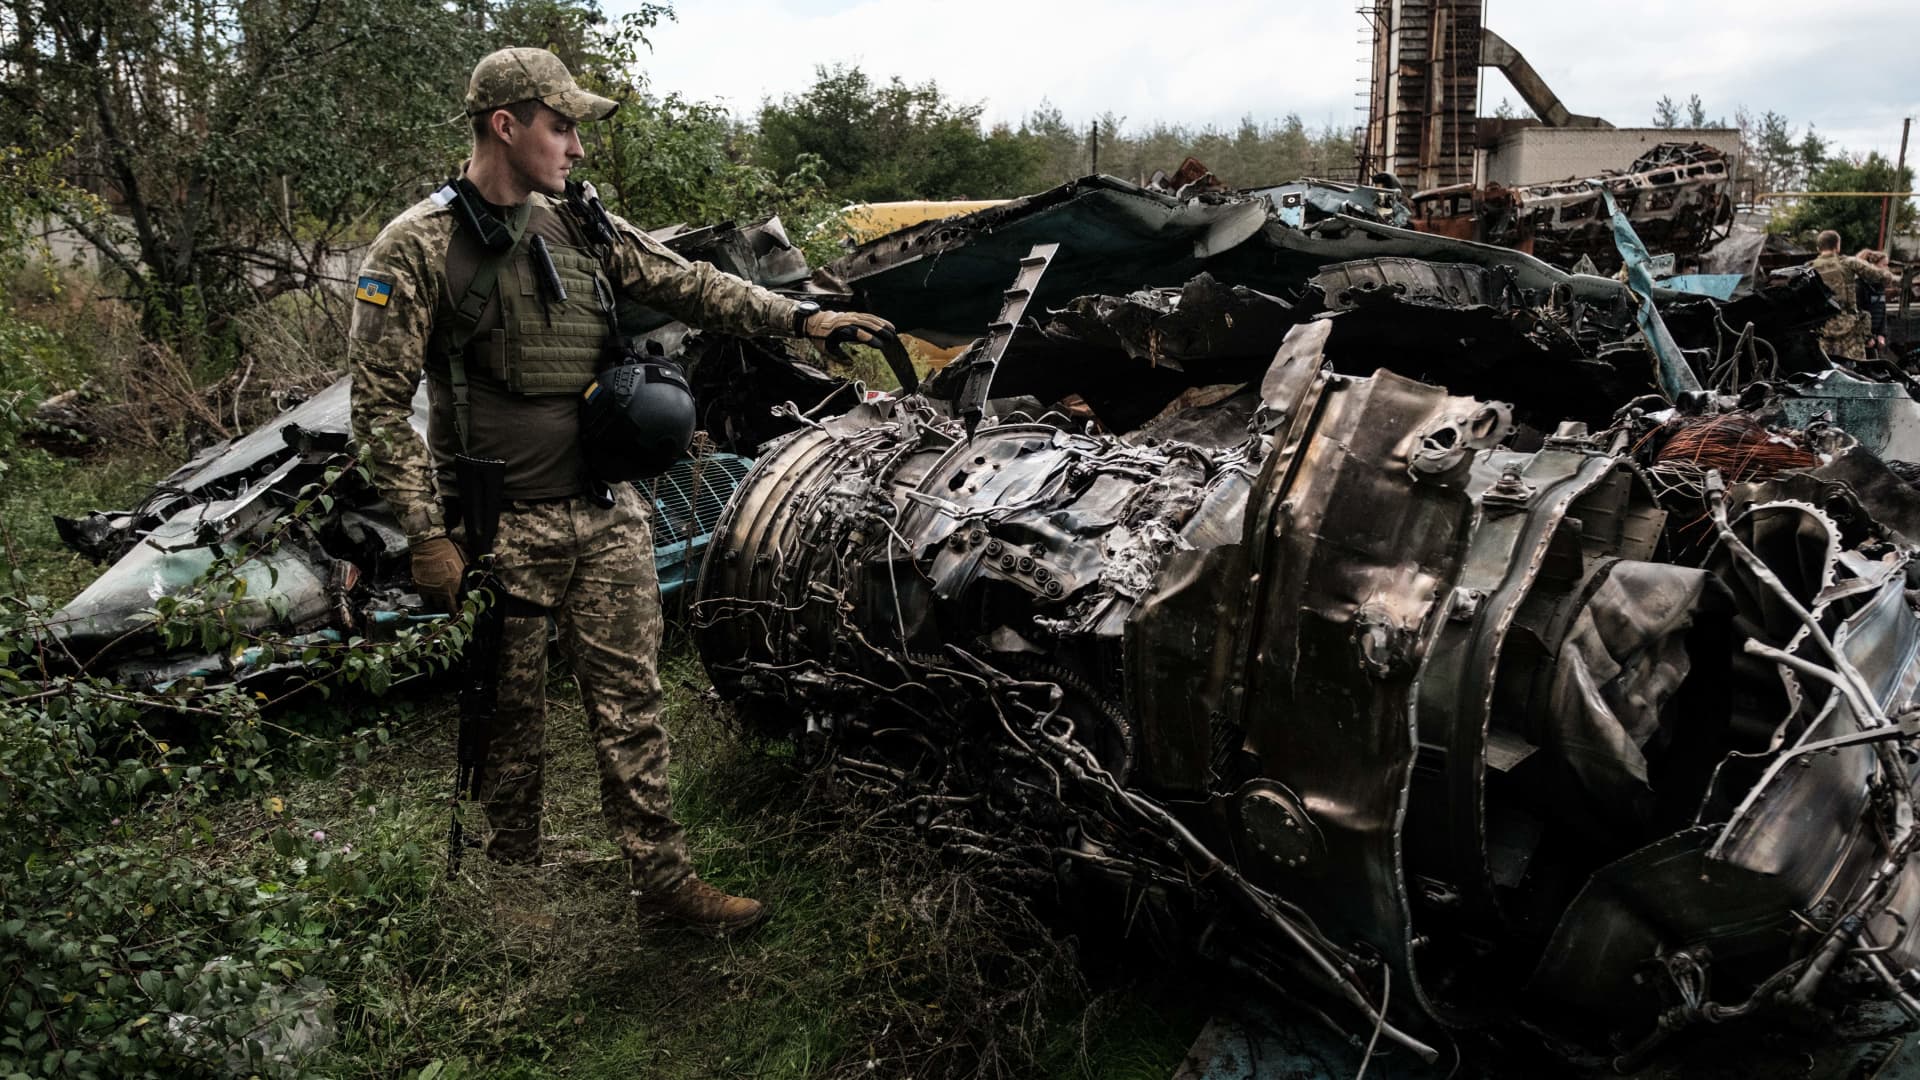 A Ukrainian army press officer shows the debris of Russian air strike aircraft Su-34 at a collection point of destroyed Russian armored vehicles at an animal feed plant in the recently retaken town of Lyman in the Donetsk region, on Oct. 5, 2022.